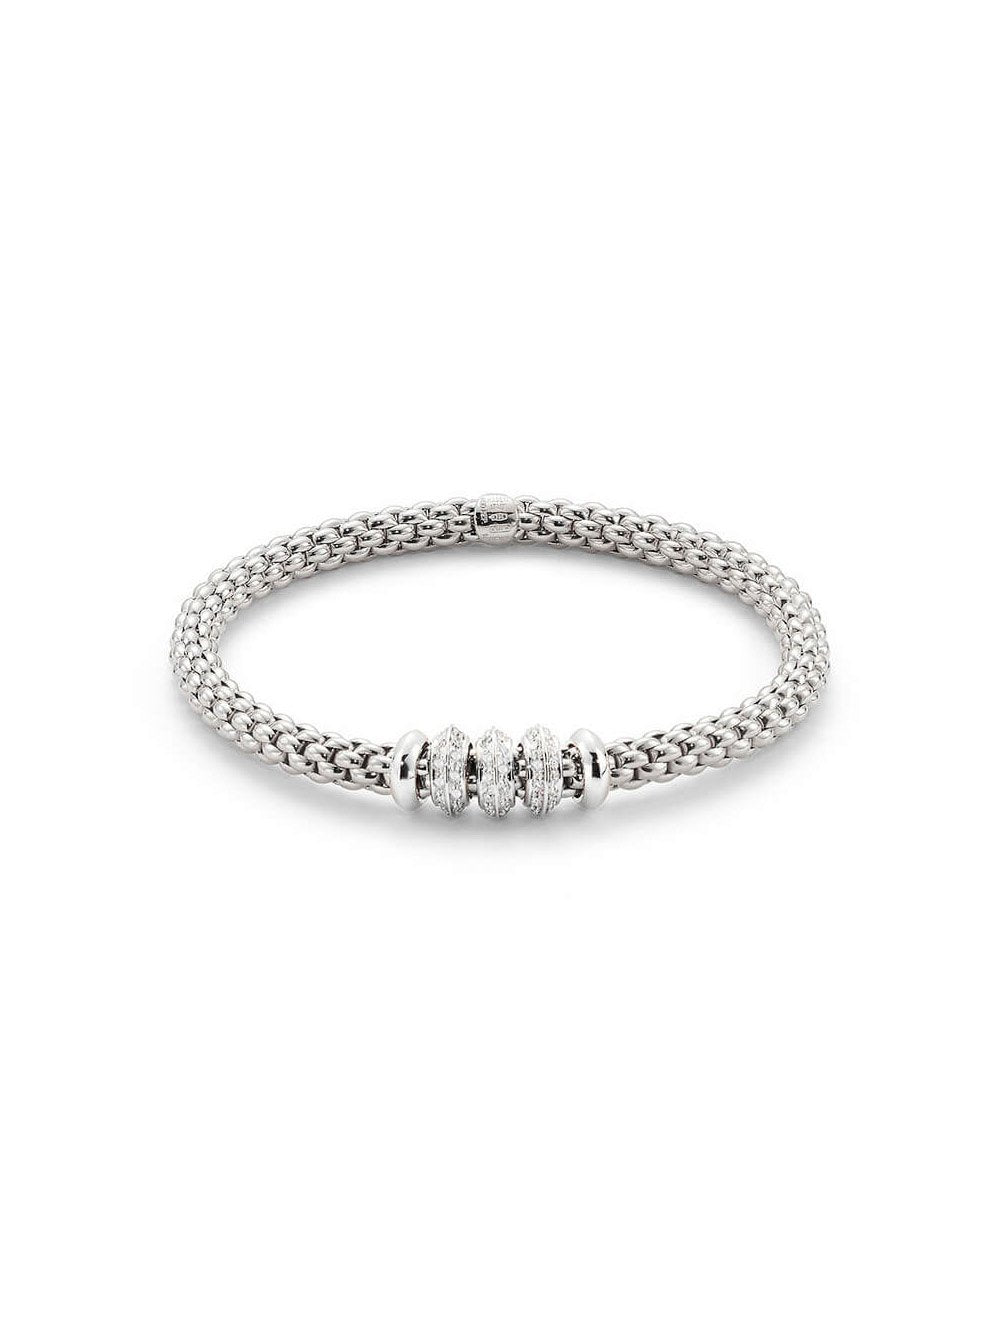 Fope Solo Bracelet in 18ct White Gold with Diamonds